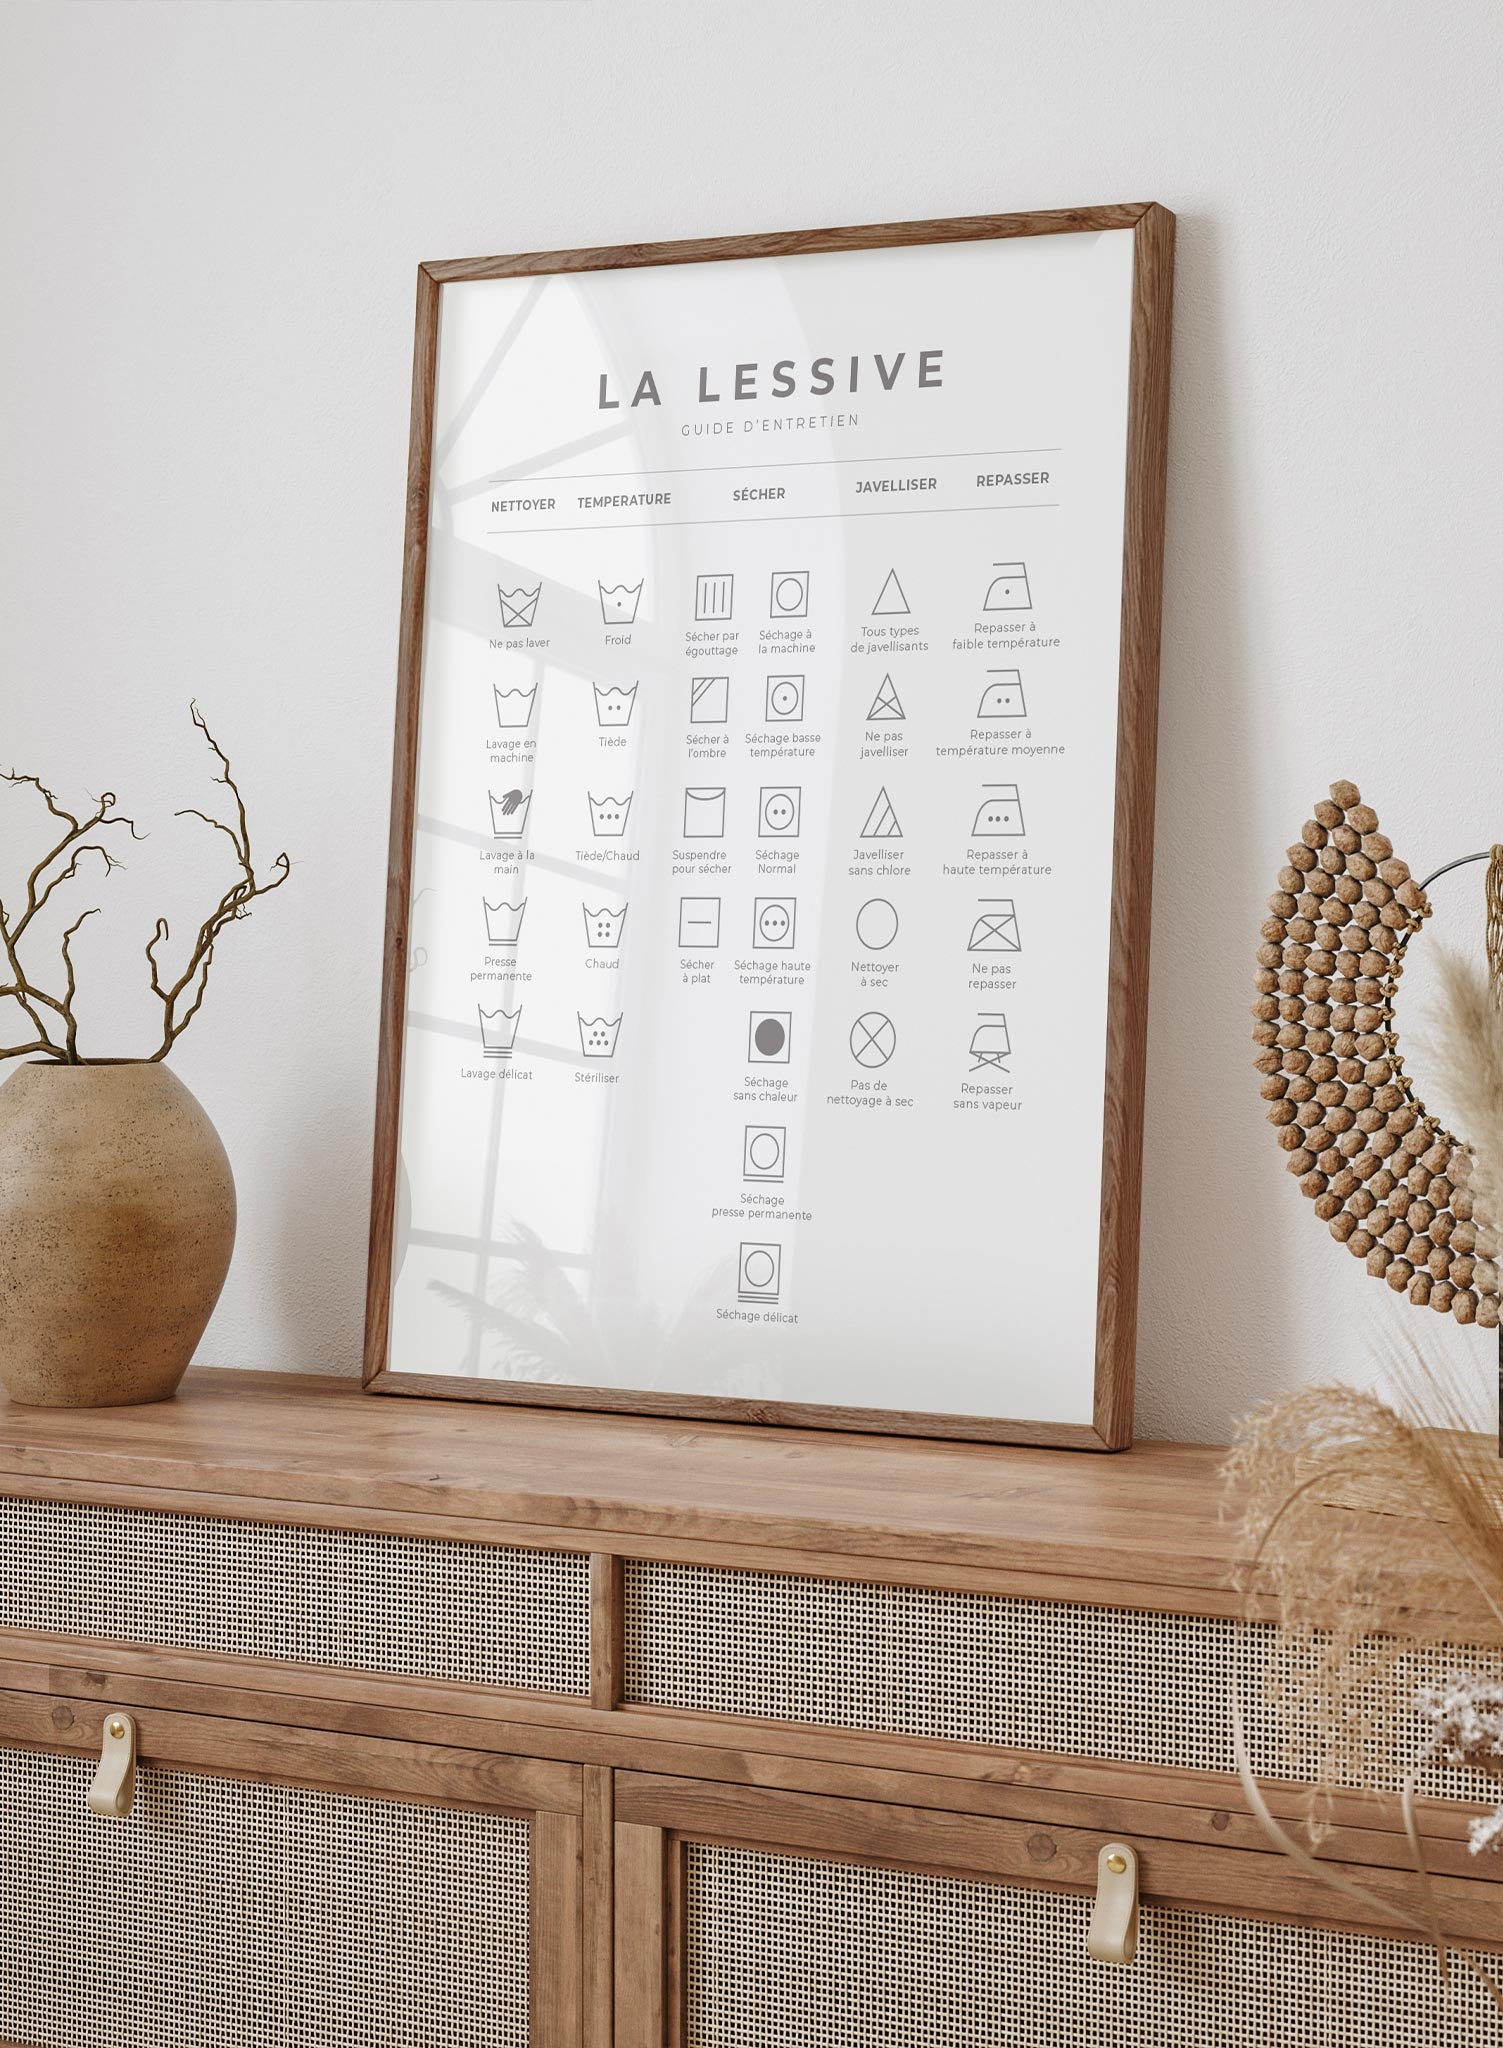 Laundry Guide in French and White is a minimalist typography by Opposite Wall of a chart of laundry symbols and their meaning. 